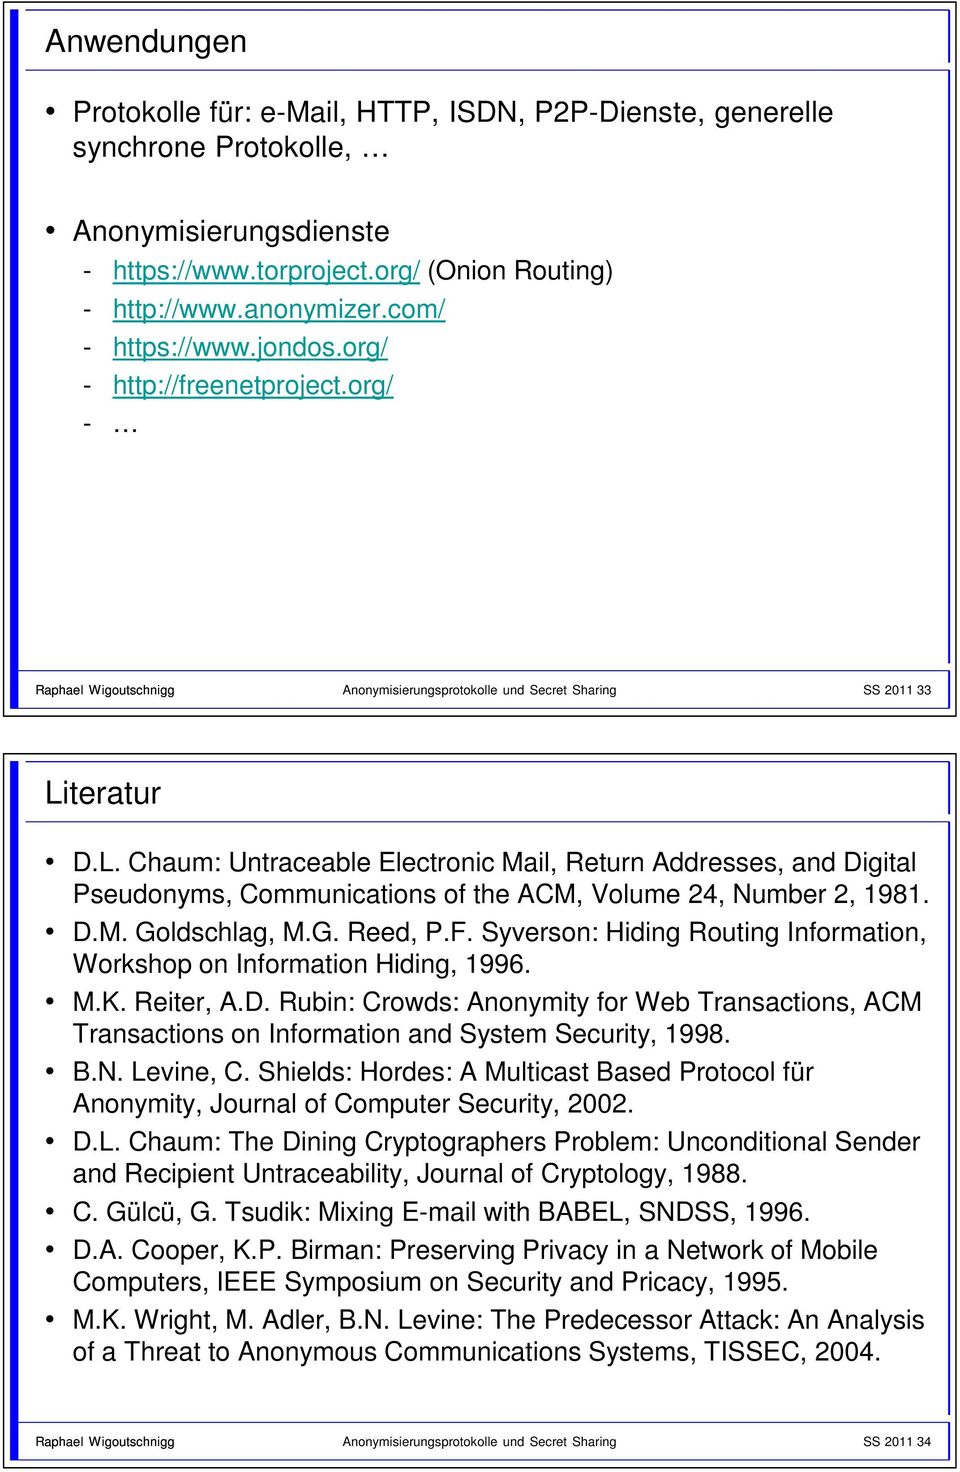 teratur D.L. Chaum: Untraceable Electronic Mail, Return Addresses, and Digital Pseudonyms, Communications of the ACM, Volume 24, Number 2, 1981. D.M. Goldschlag, M.G. Reed, P.F.